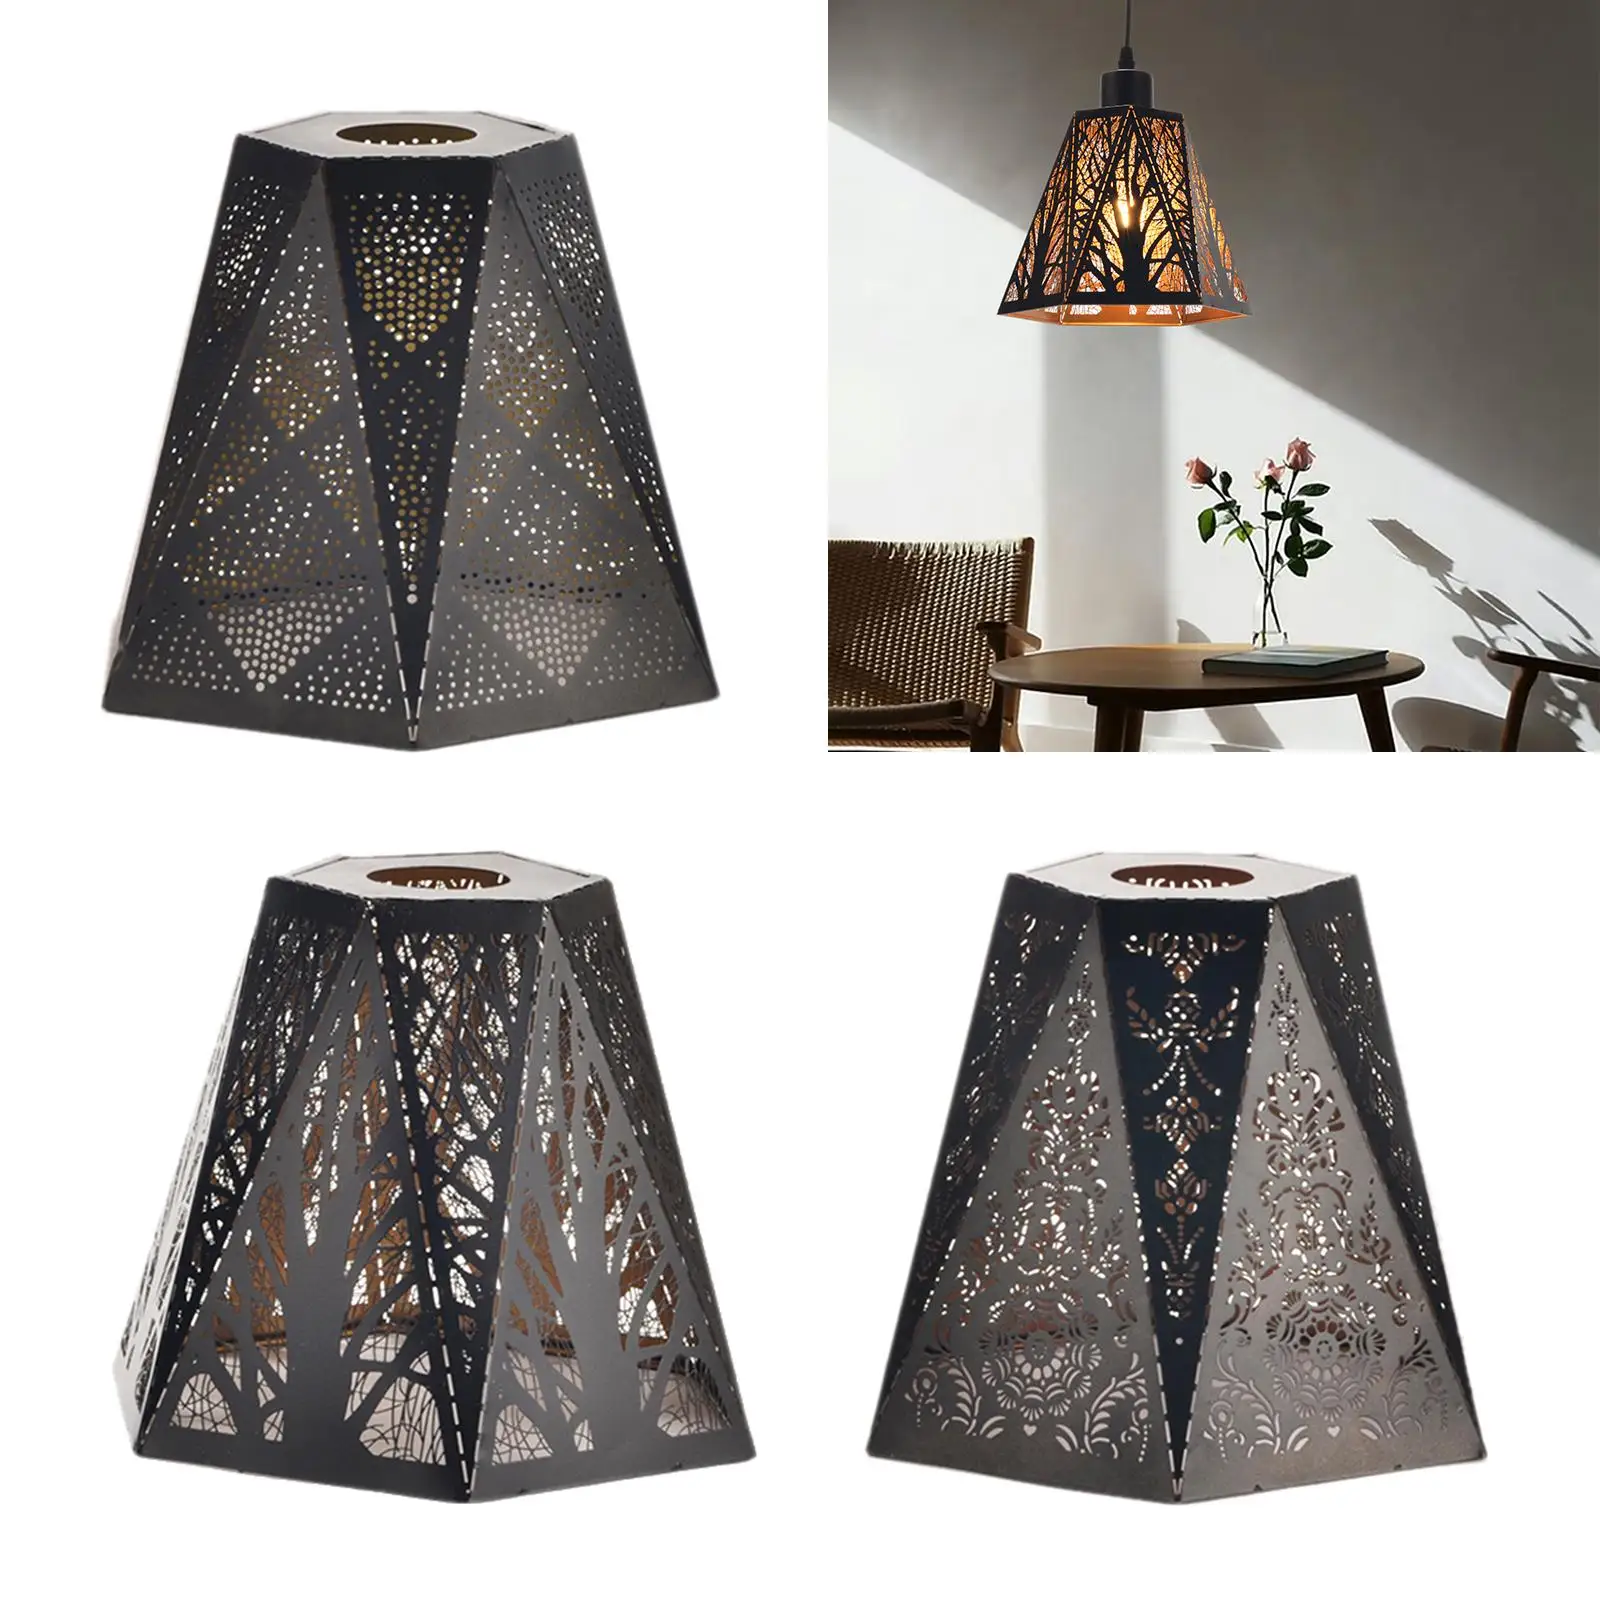 Rustic Style Pendant Lamp Shade Wrought Iron Lampshade for Teahouse Hotel